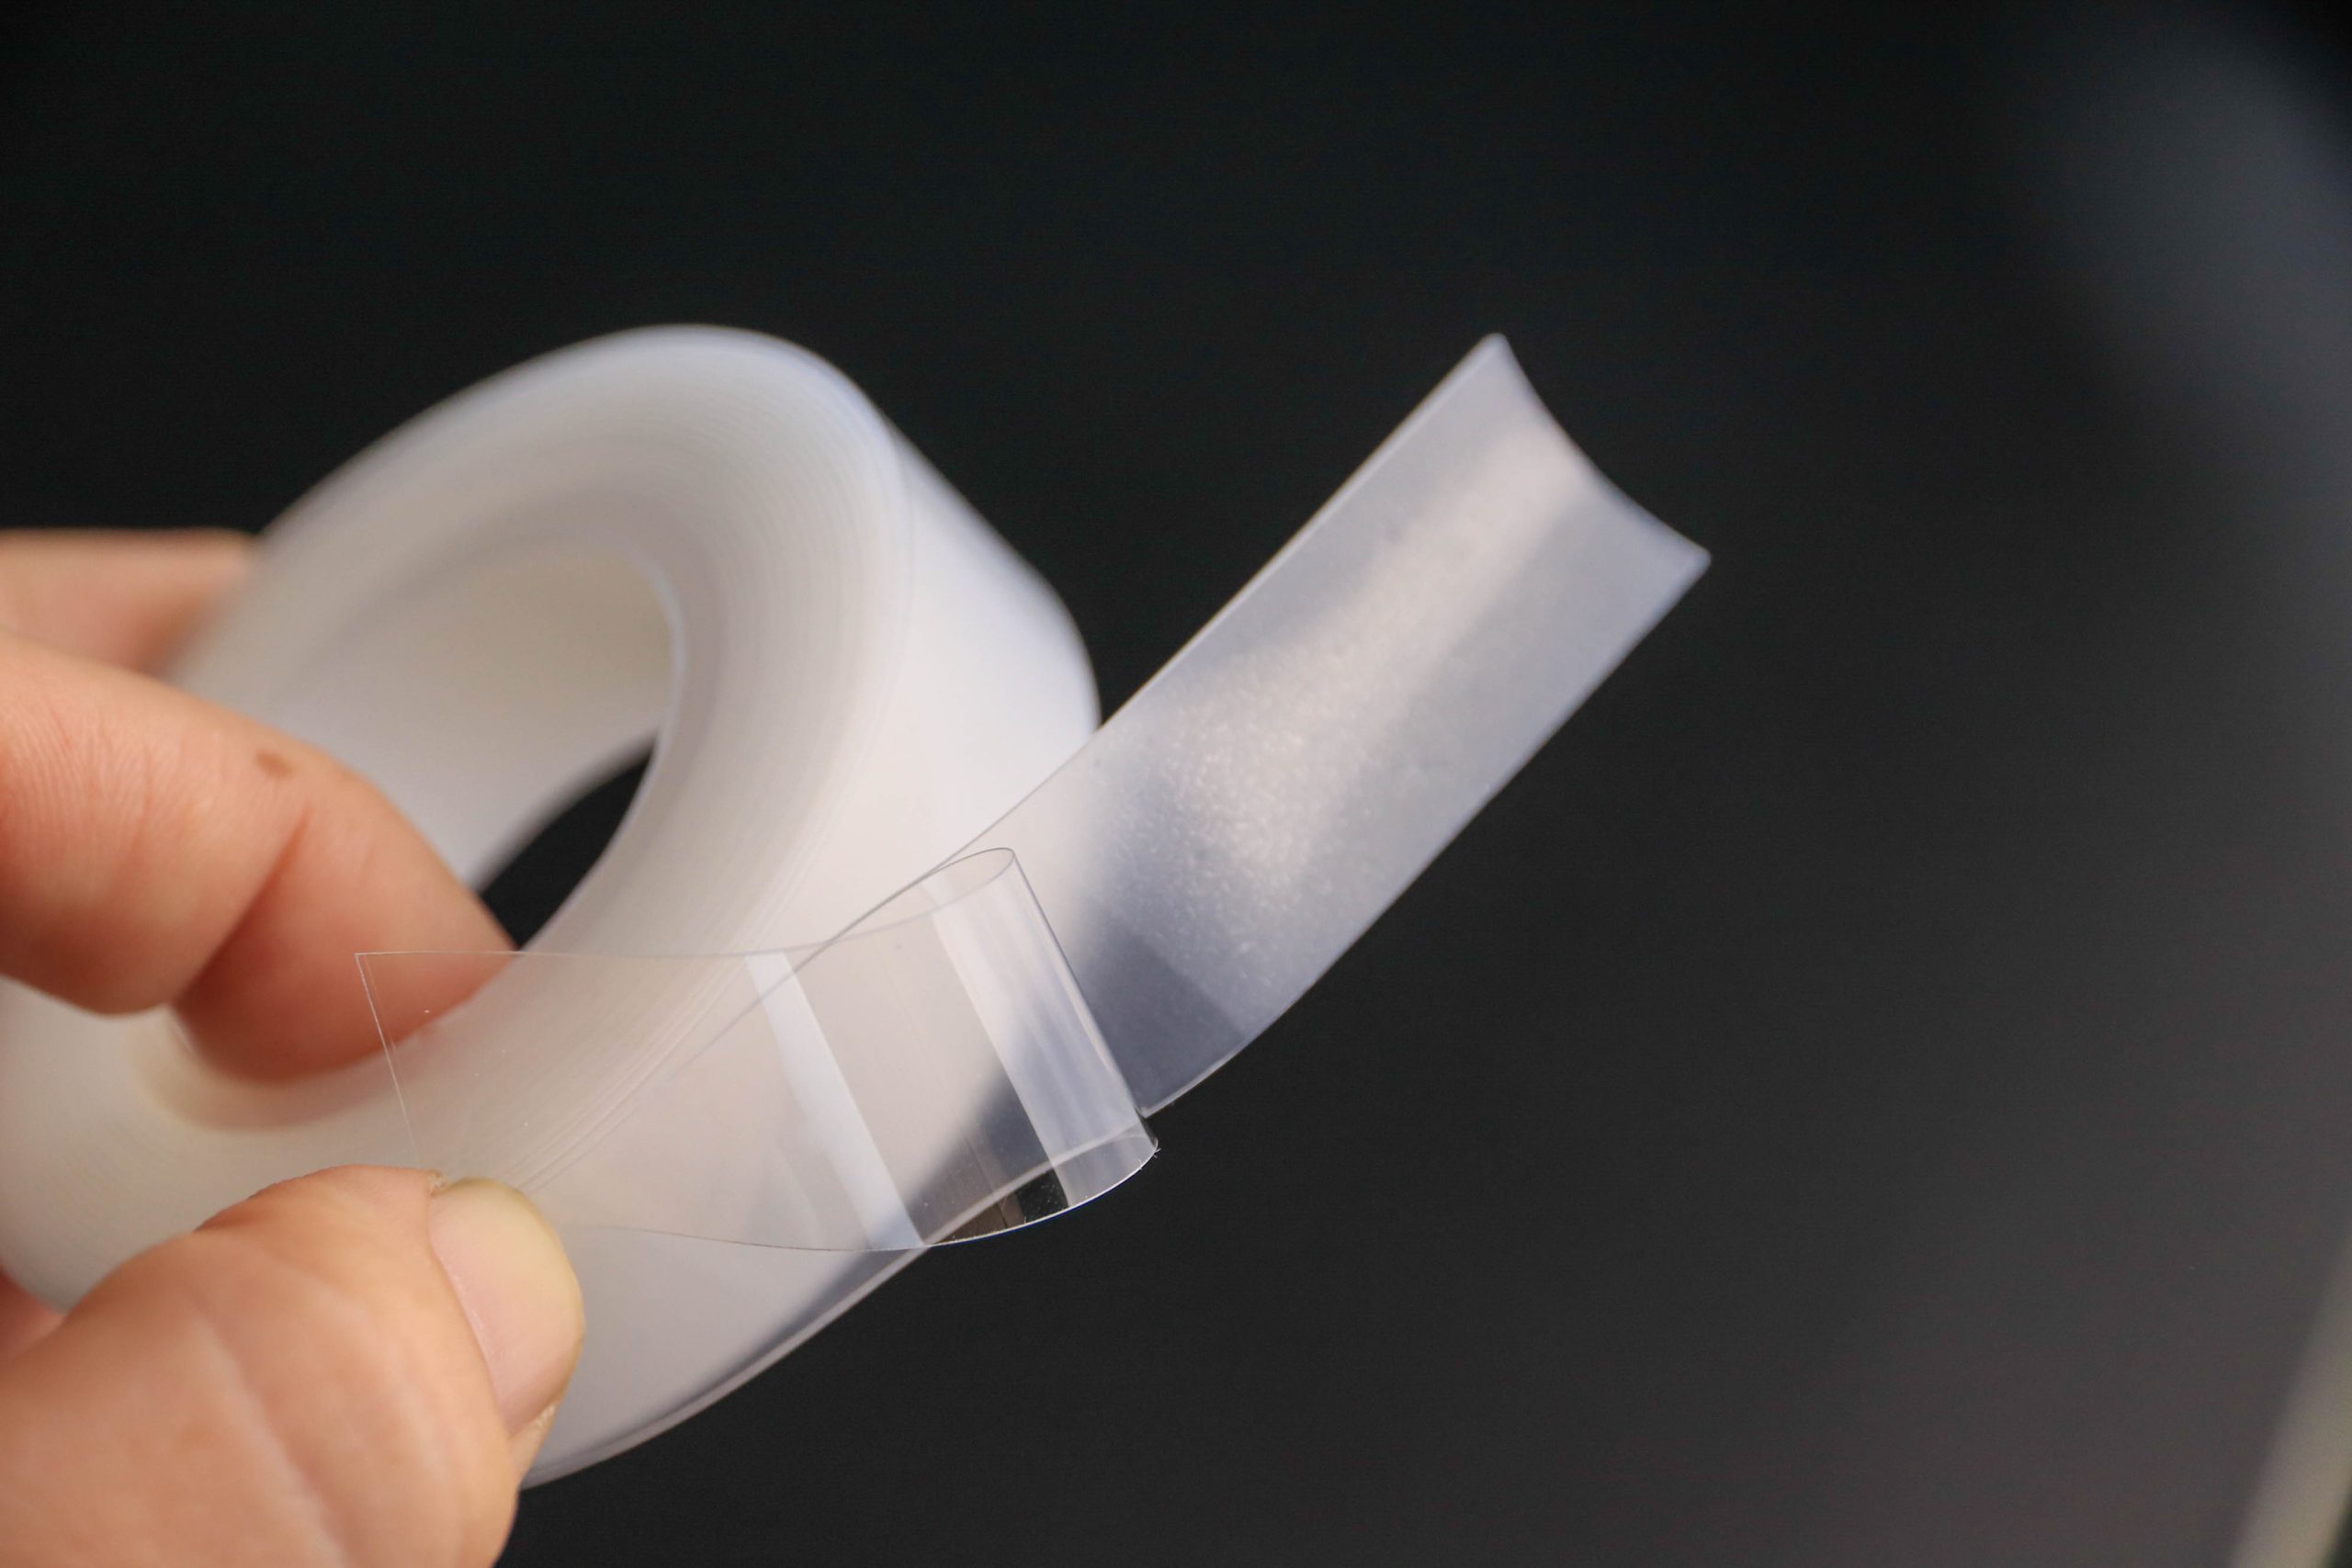 Innovation in Elastic Non-Slip Silicone Gripper Tapes for Clothing Brands -  Digital Journal